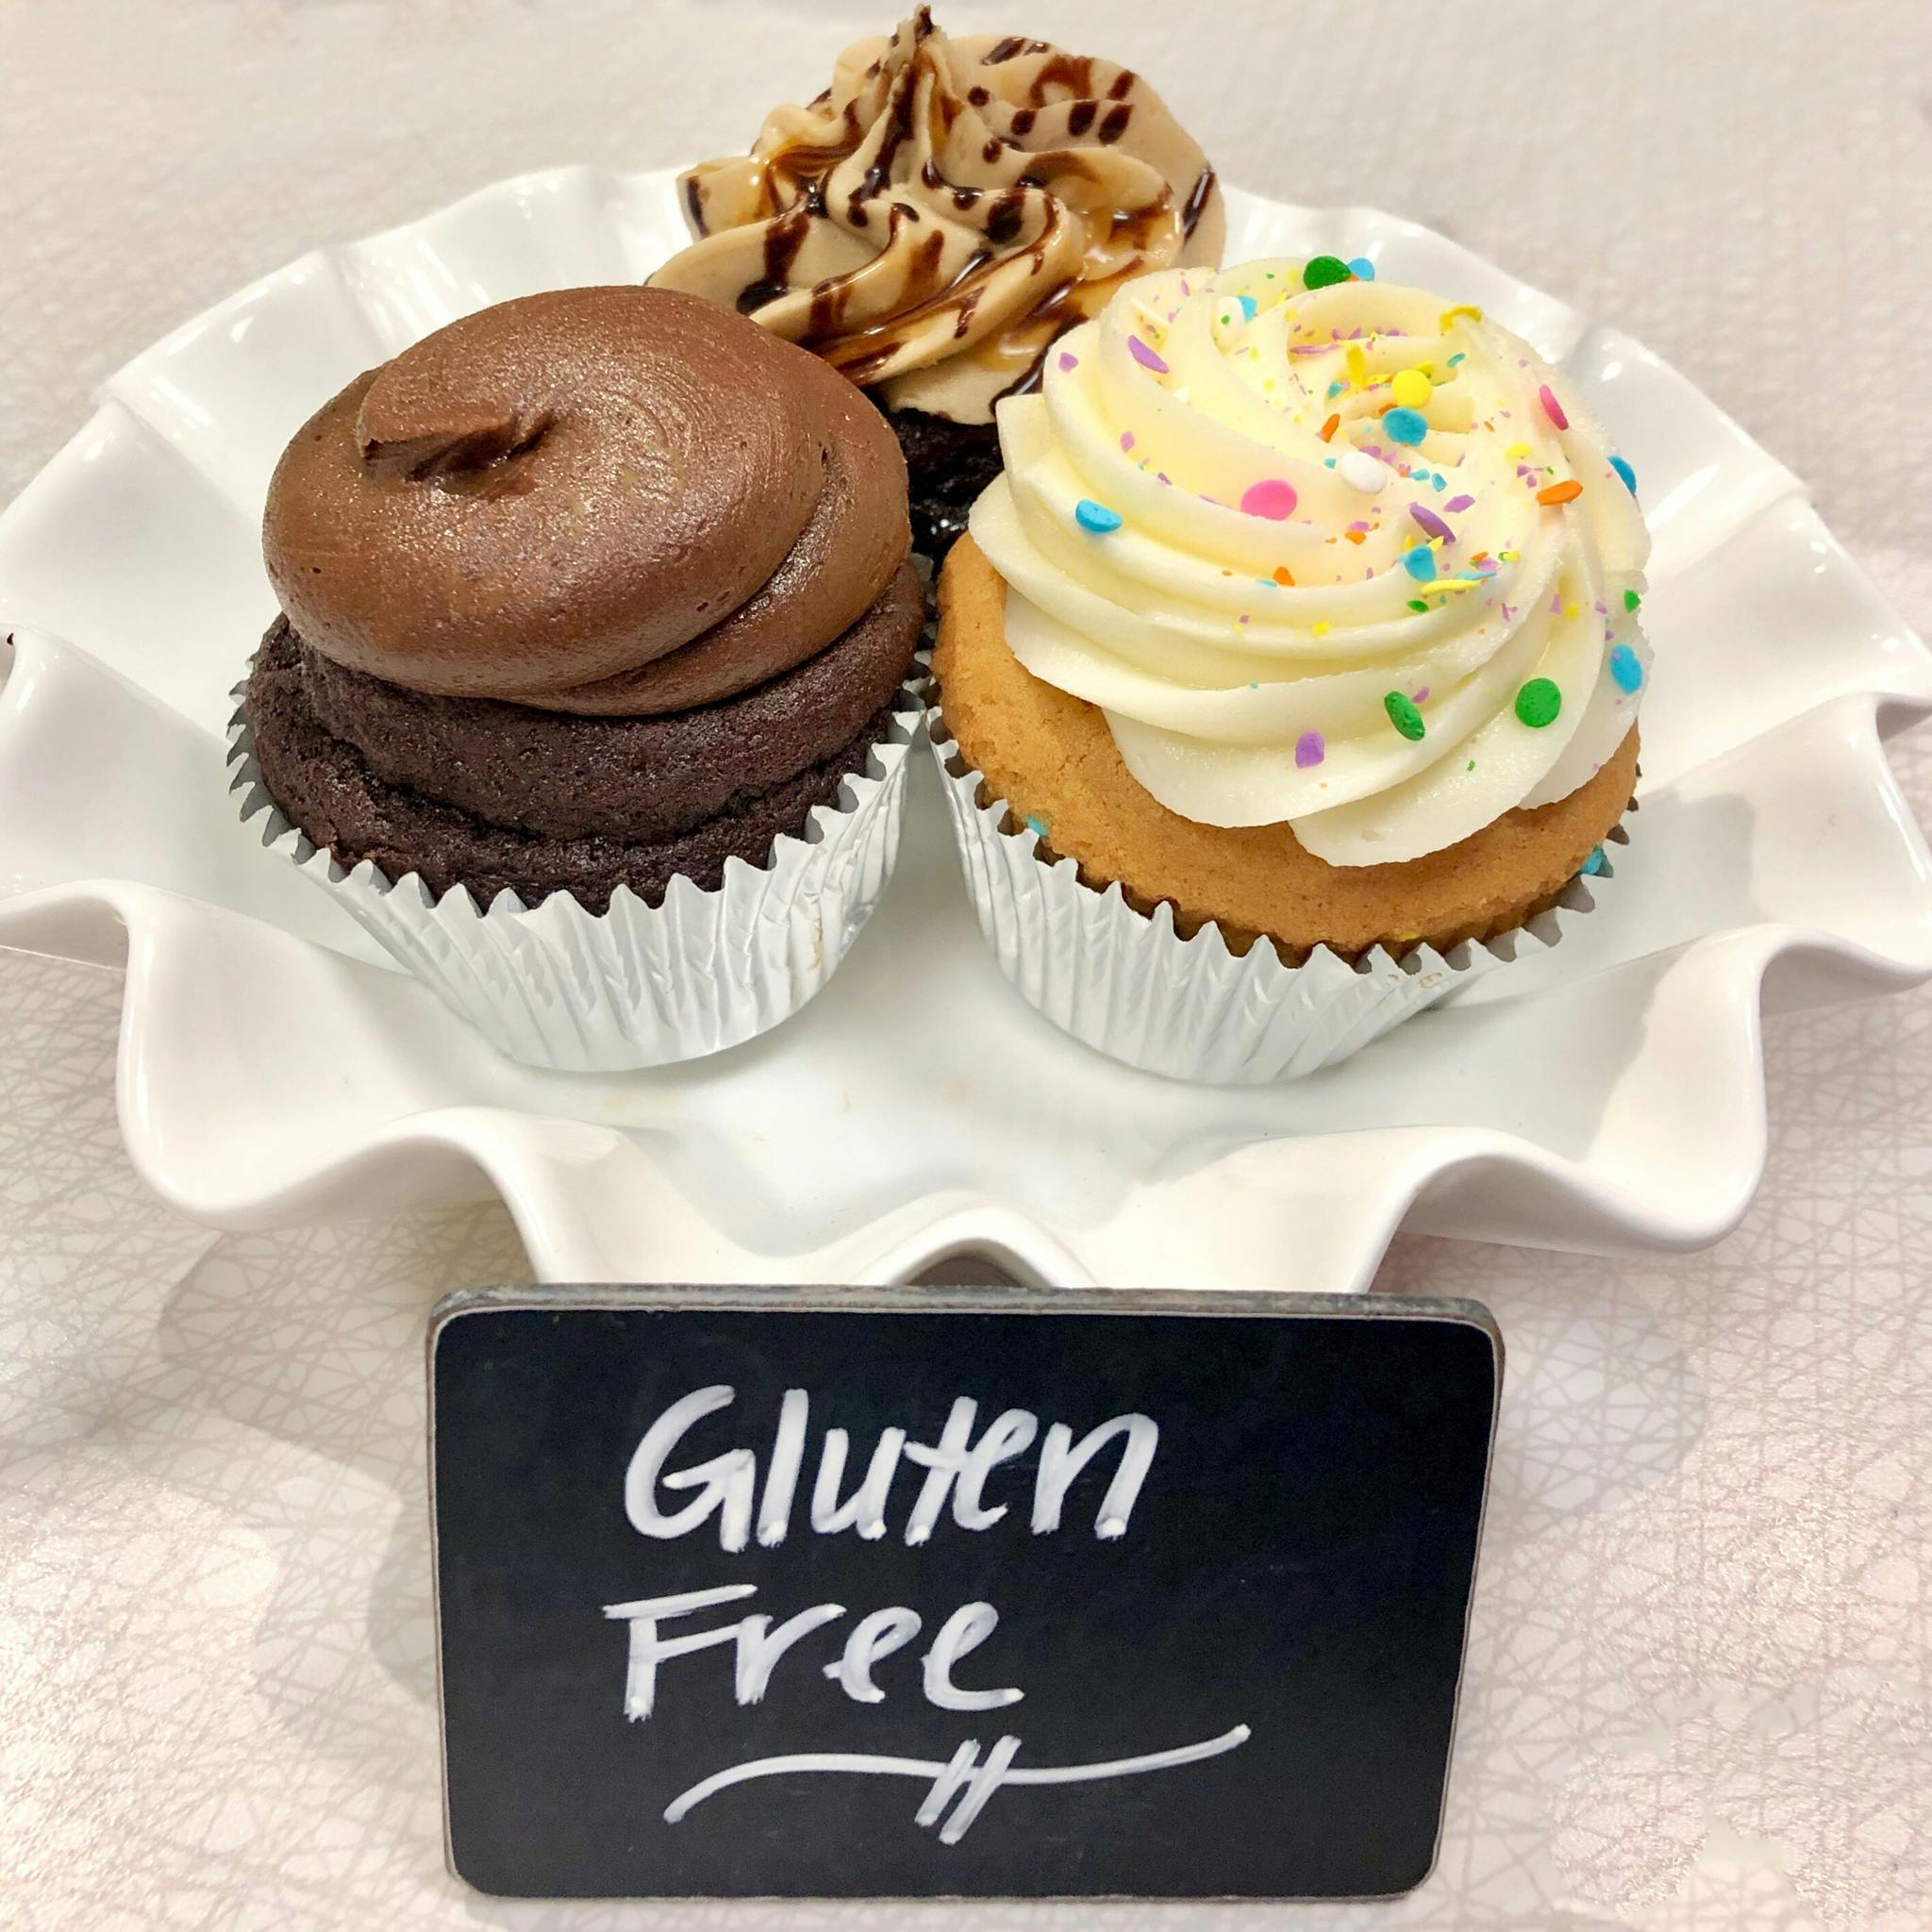 Gluten-Free Cupcakes from Classy Girl Cupcakes - Jefferson St in Milwaukee, WI